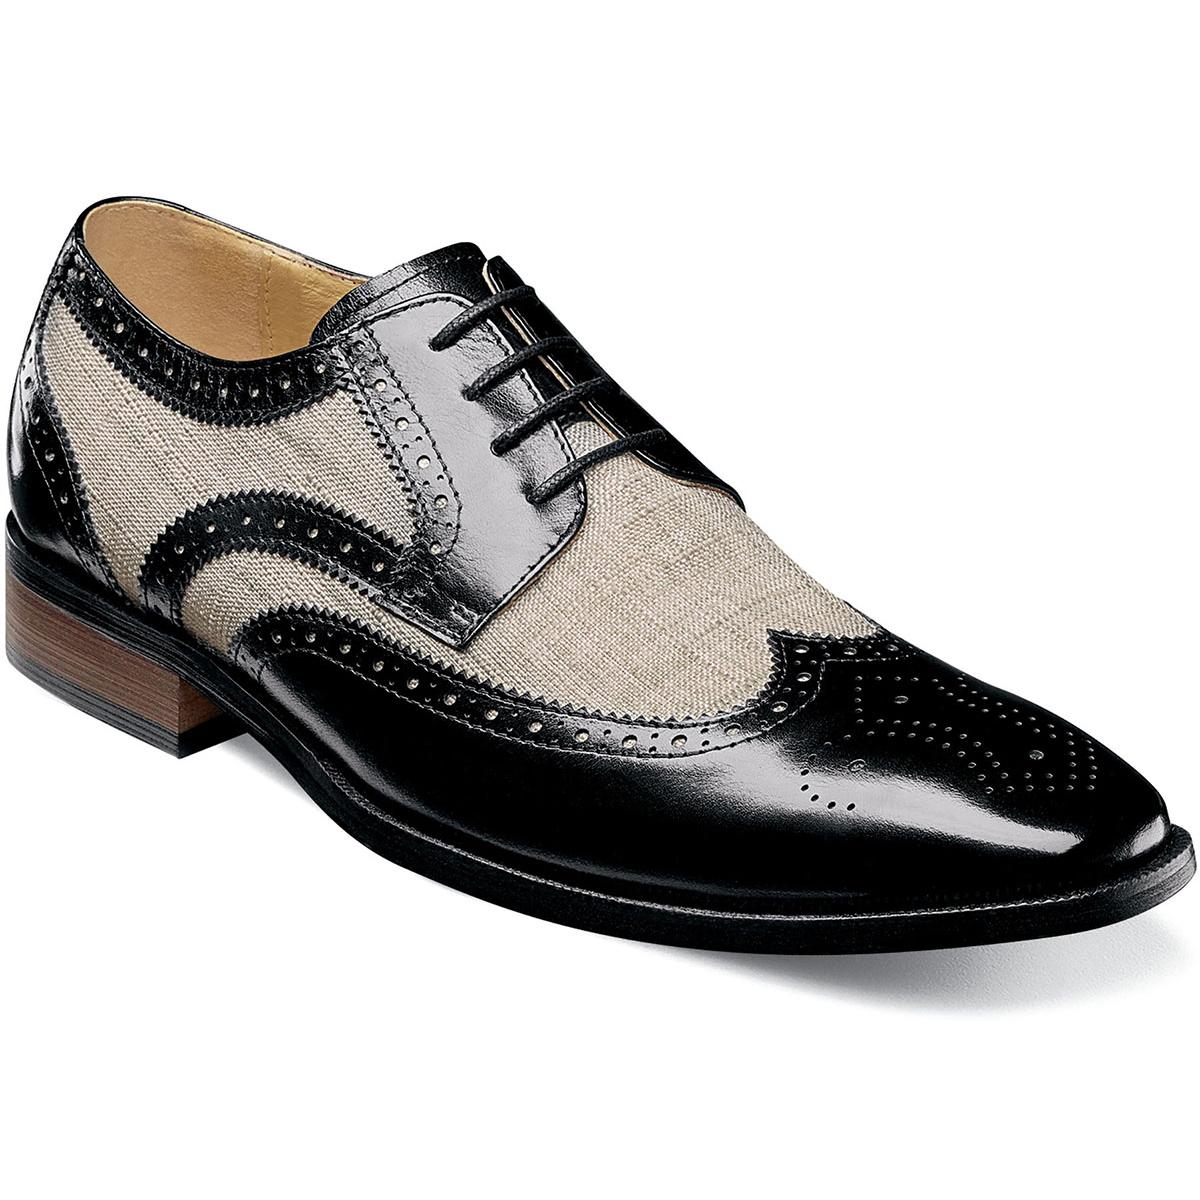 Stacy Adams Kemper Black / White Genuine Leather / Linen Wingtip Shoes ...